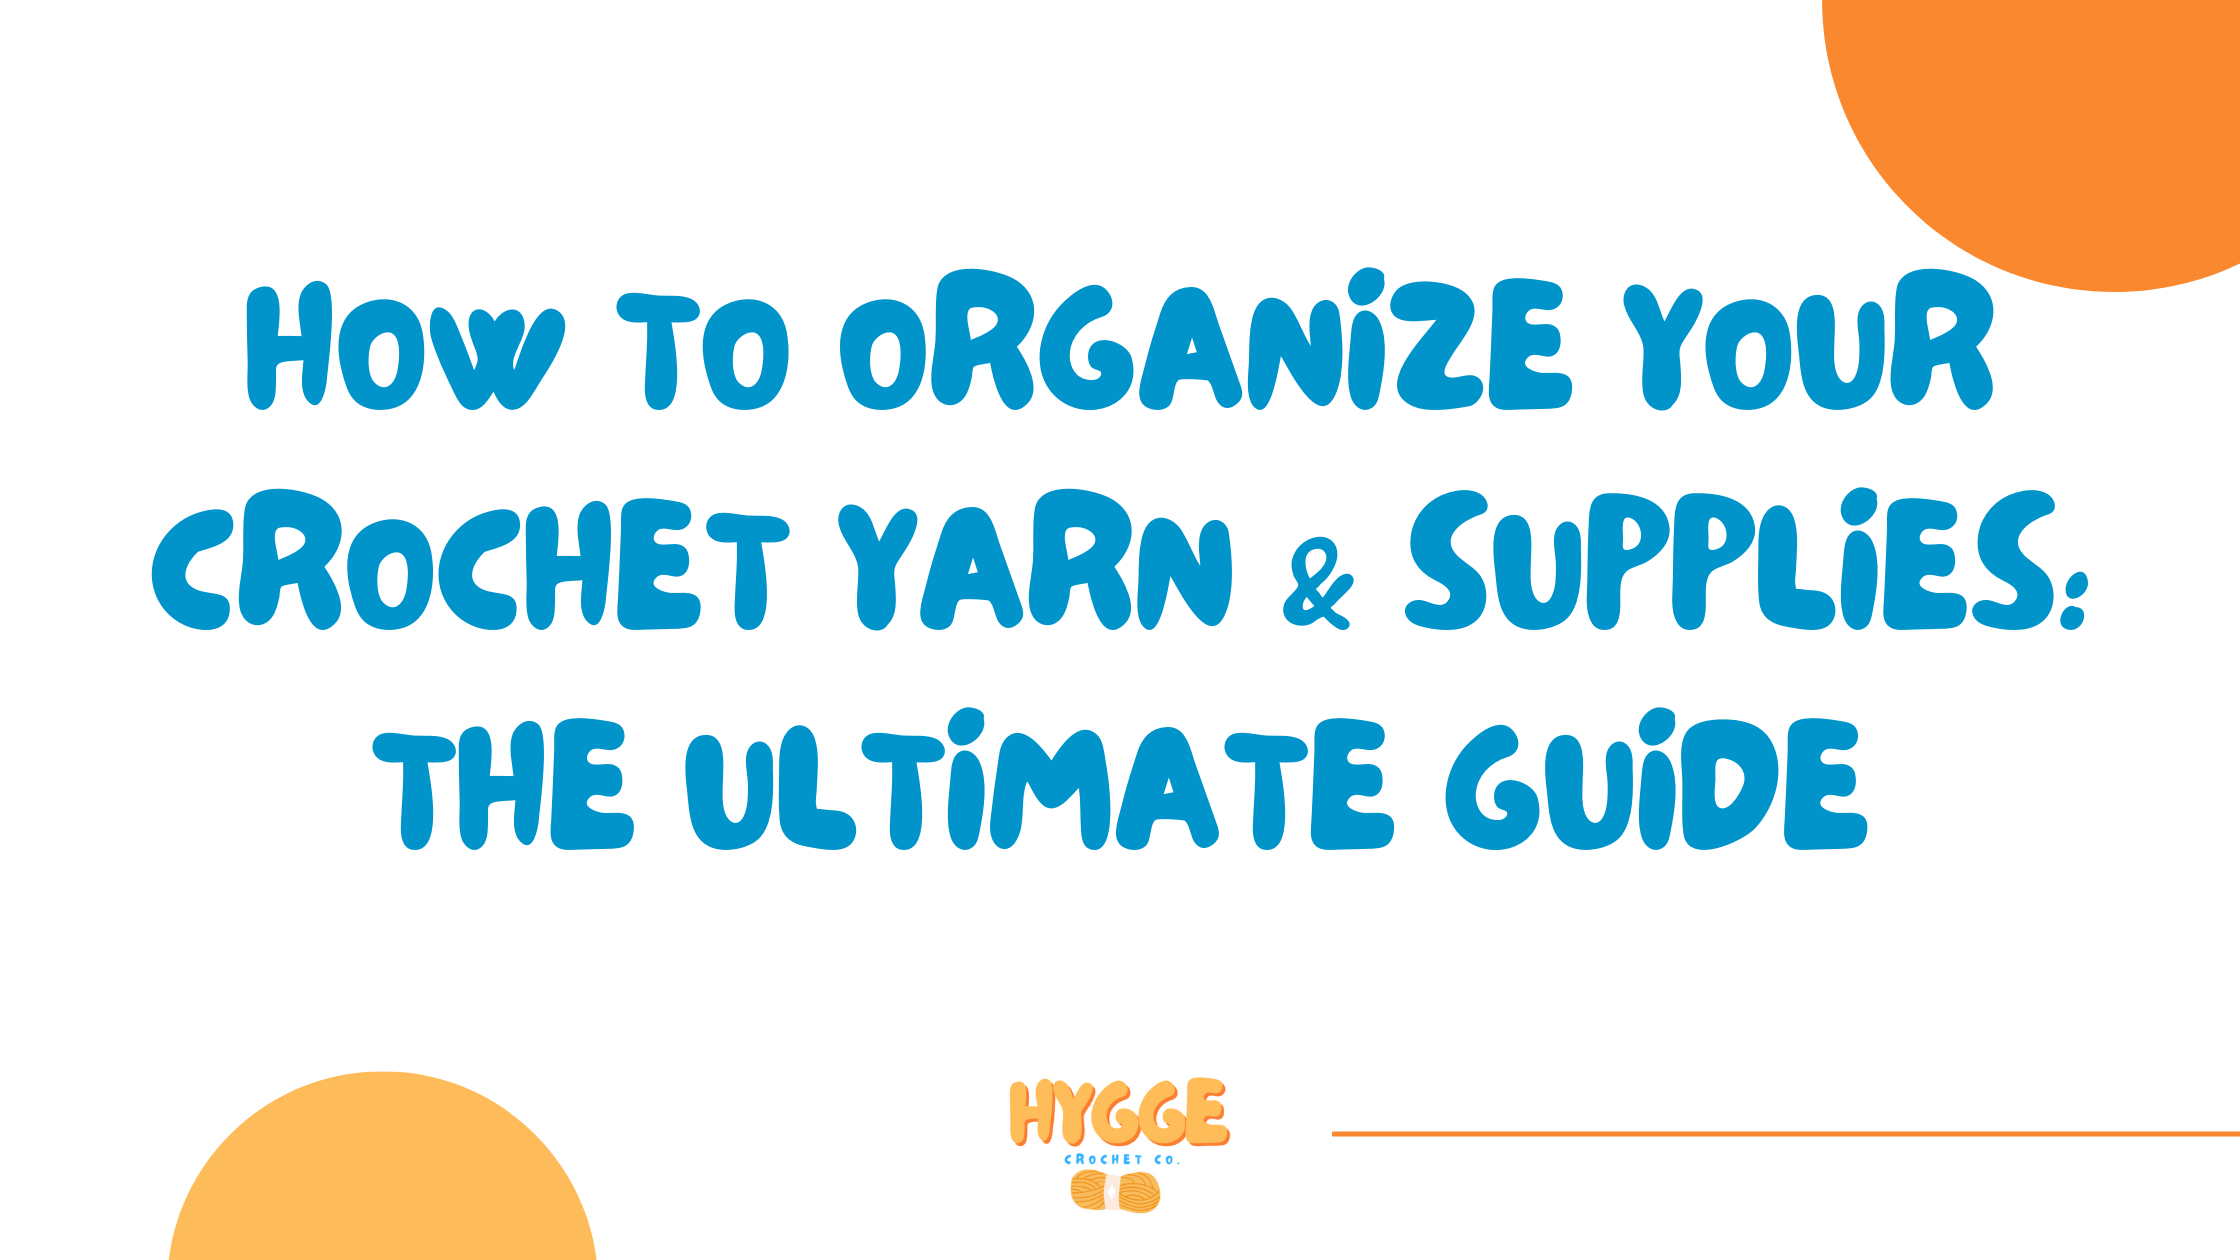 how to organize your crochet and yarn supplies: the ultimate guide